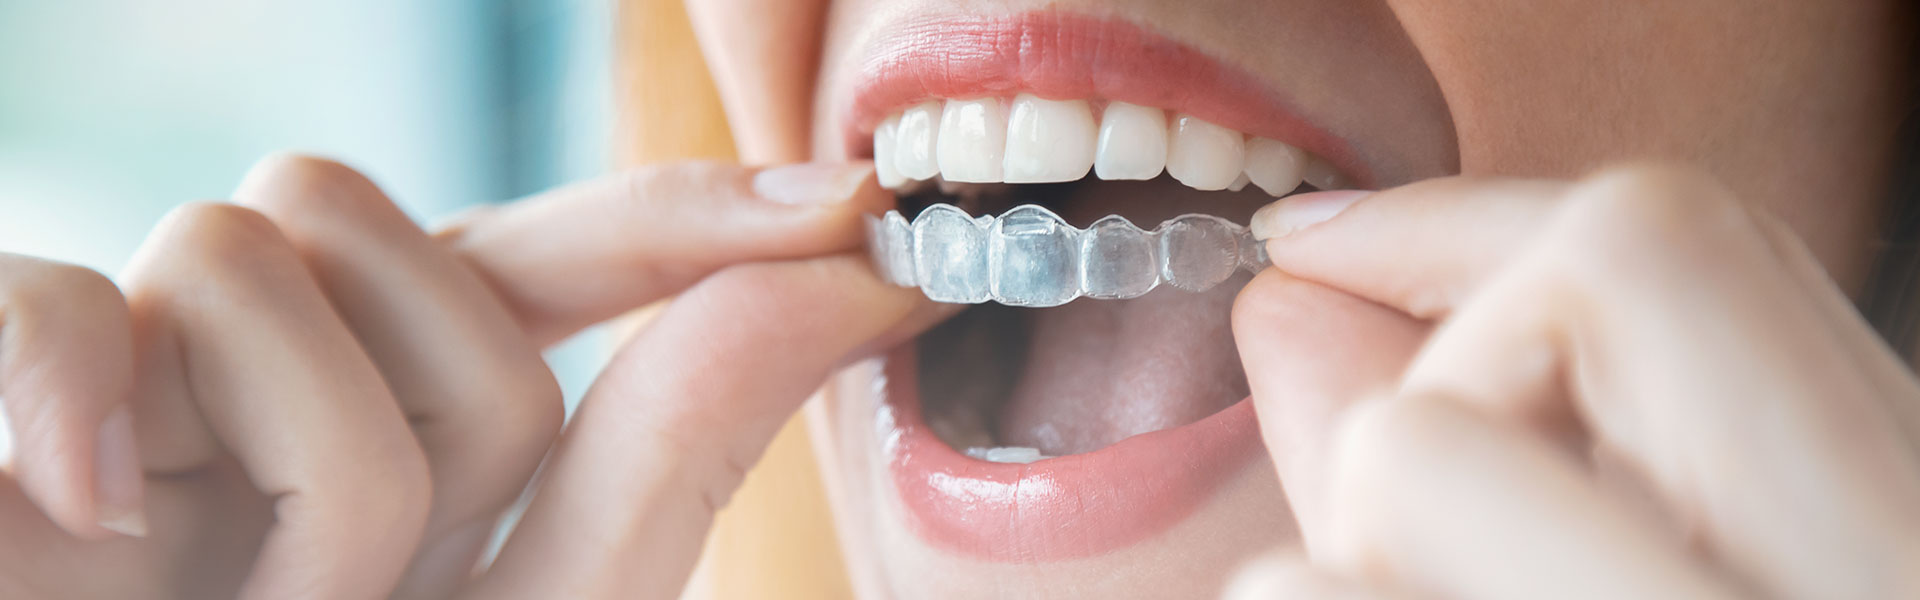 A woman is using clear aligners